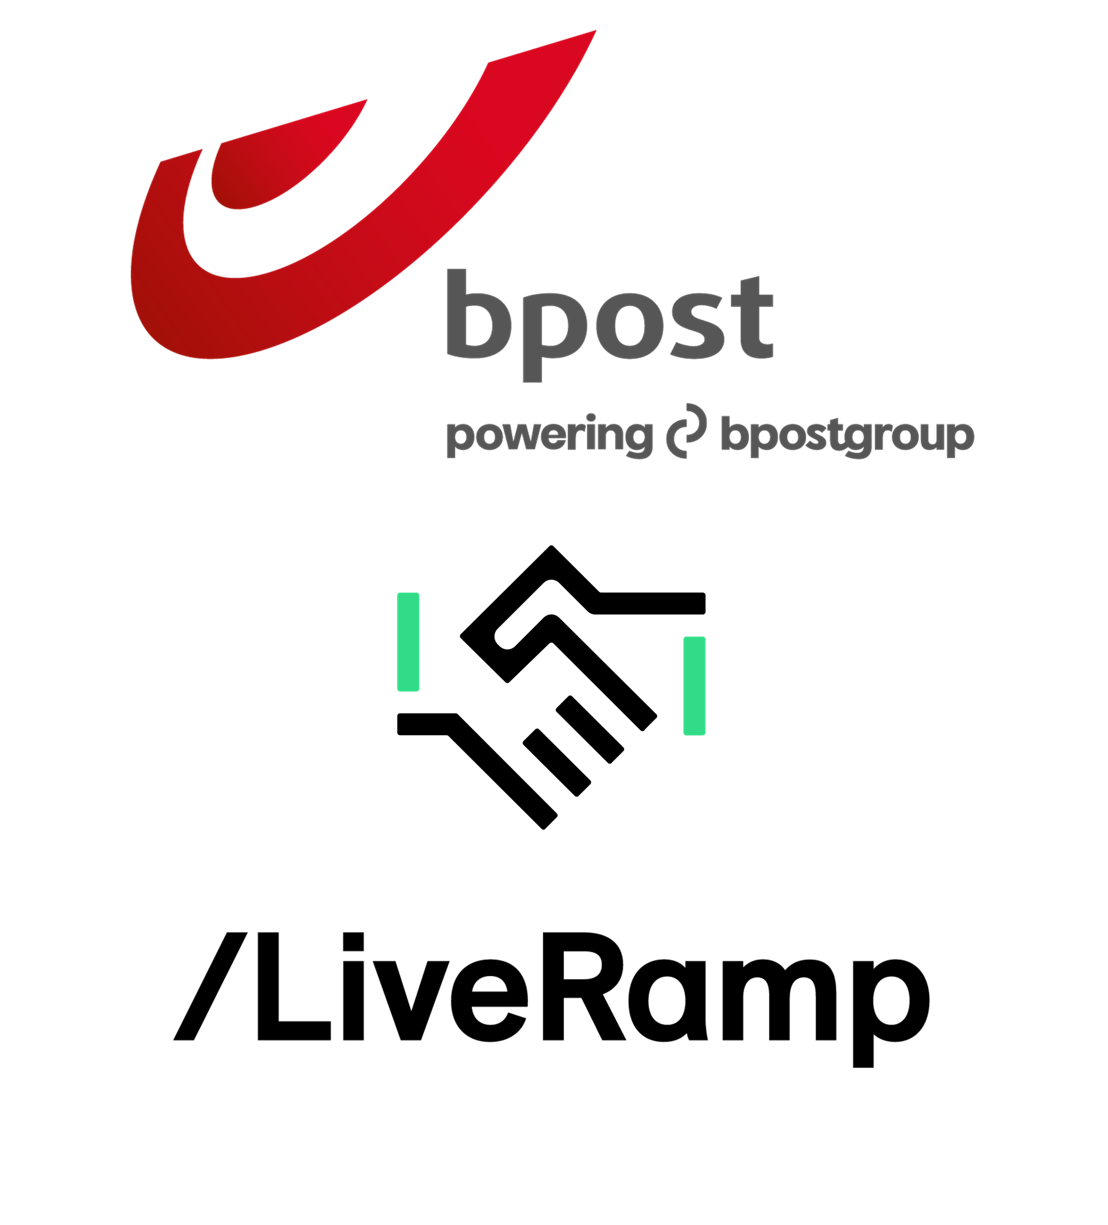 bpost chooses LiveRamp to further personalize its omnichannel Marketing campaigns